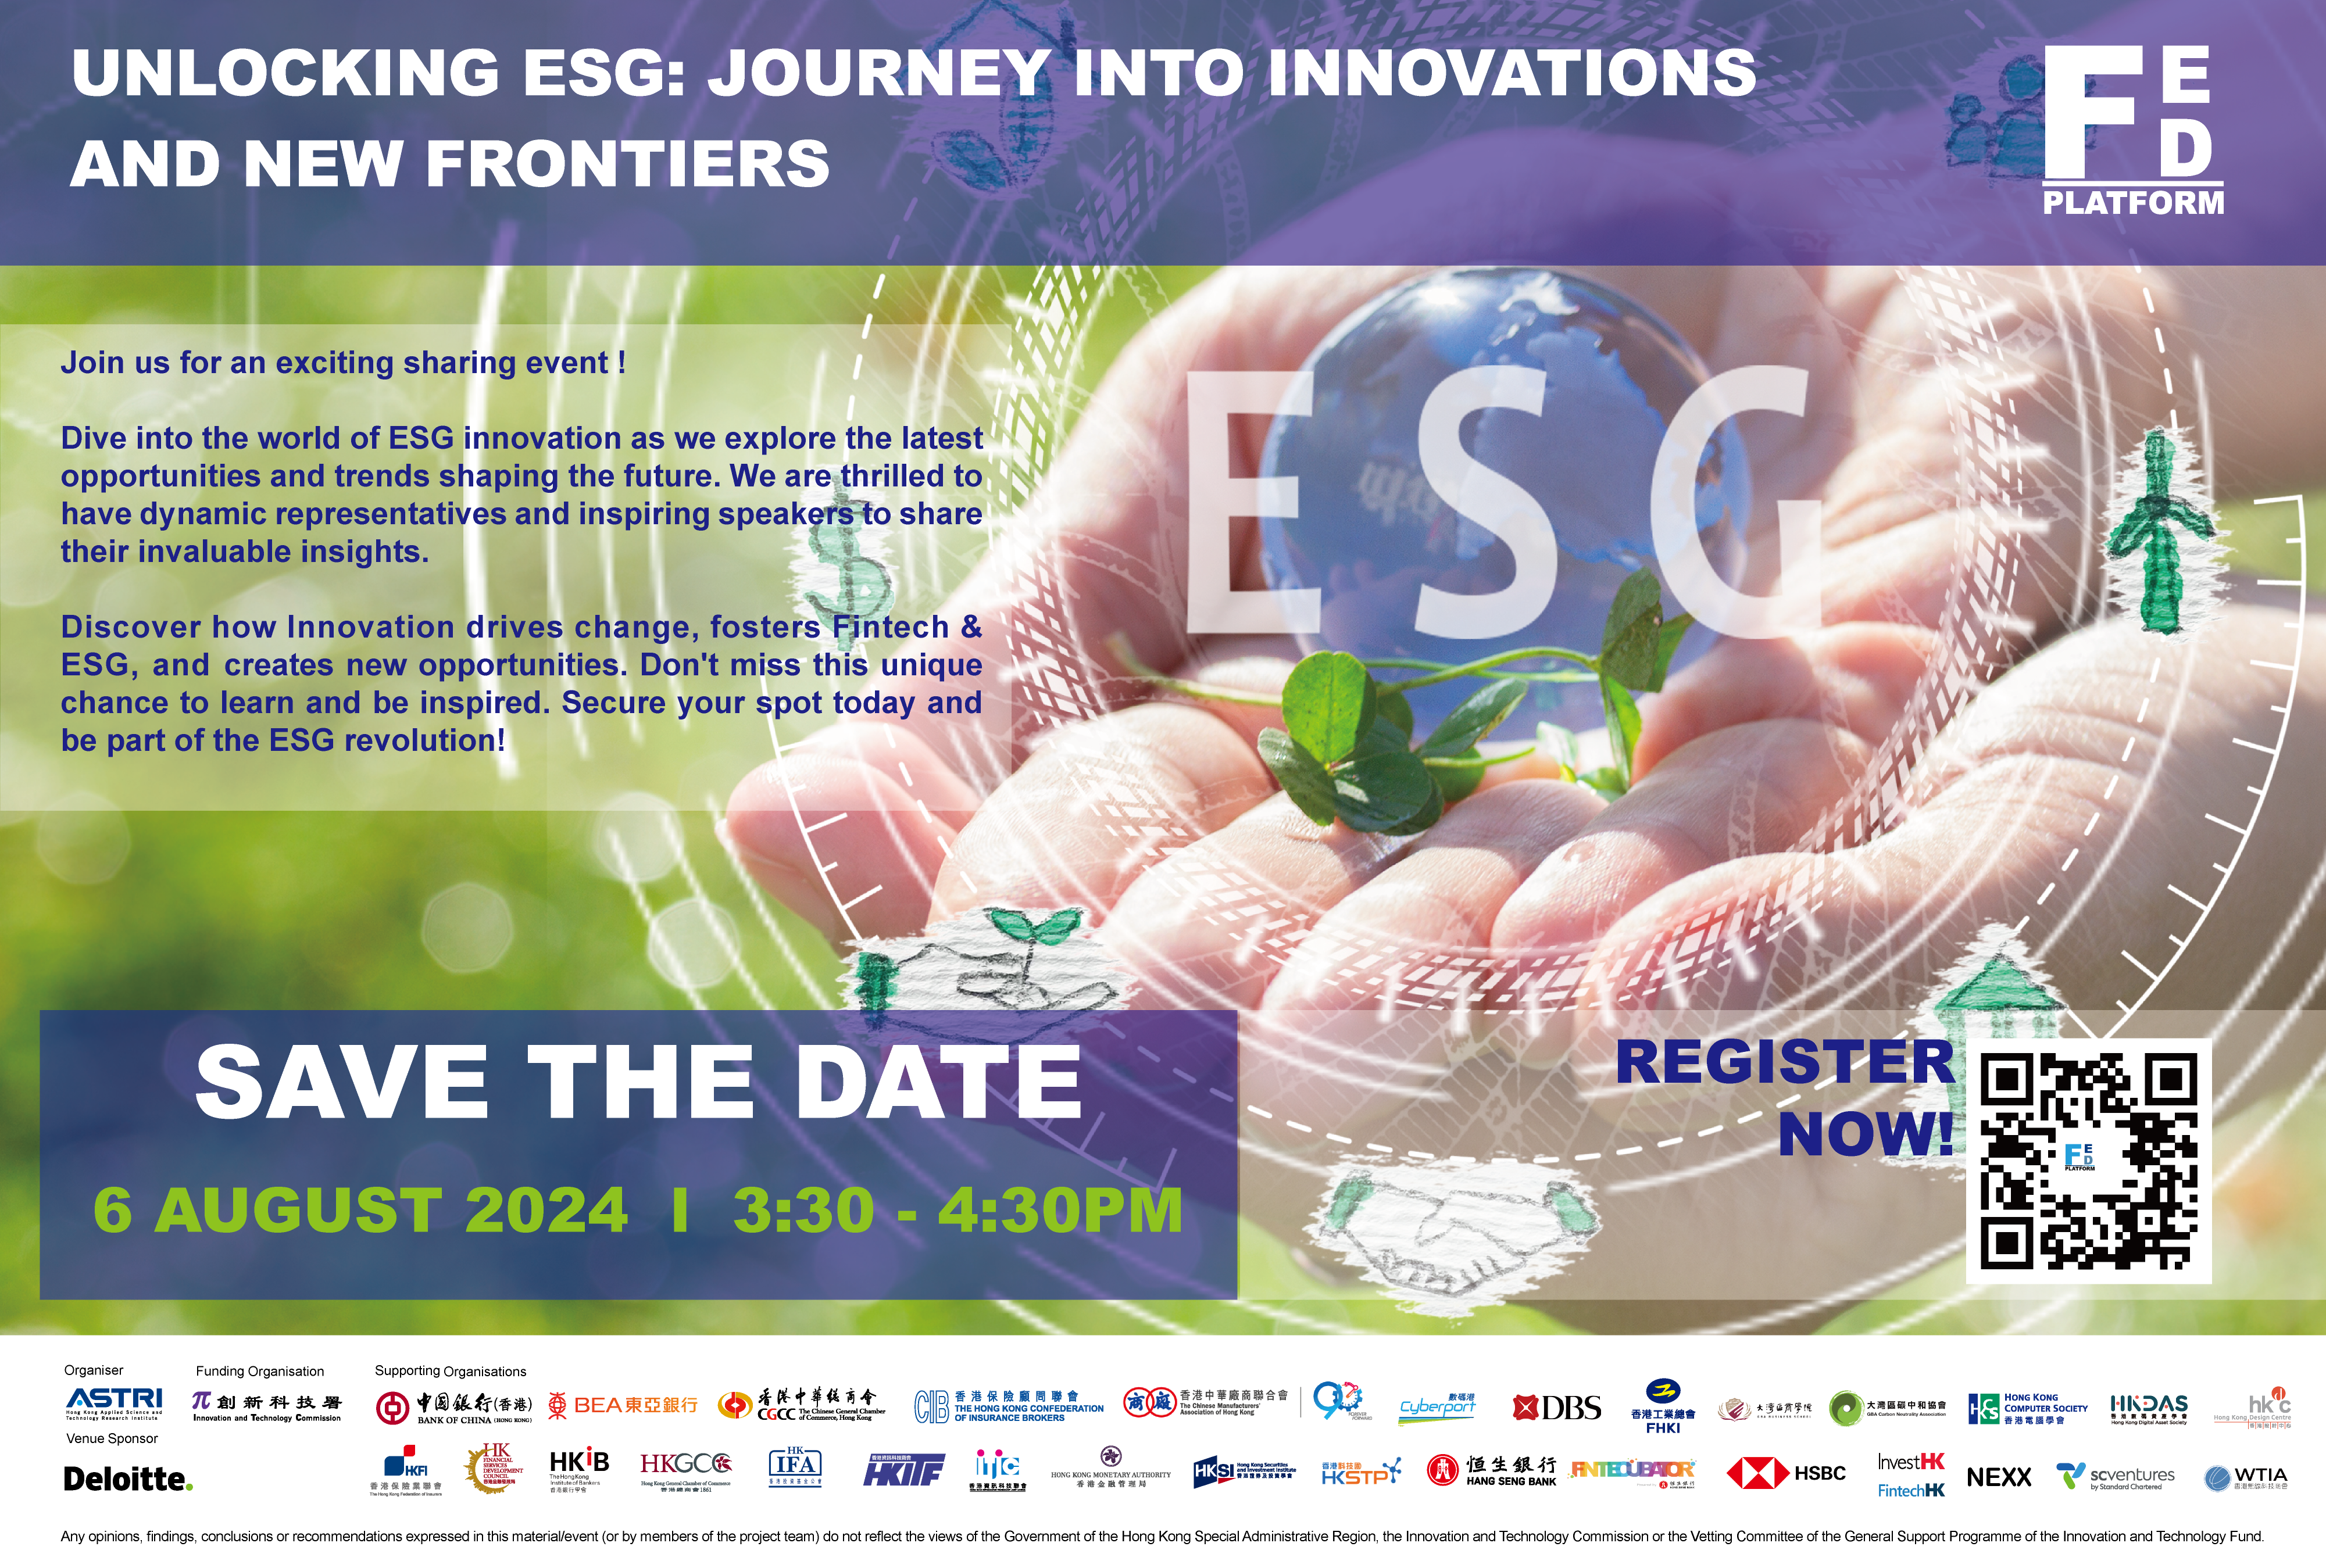 Unlocking ESG: Journey into Innovations and New Frontiers